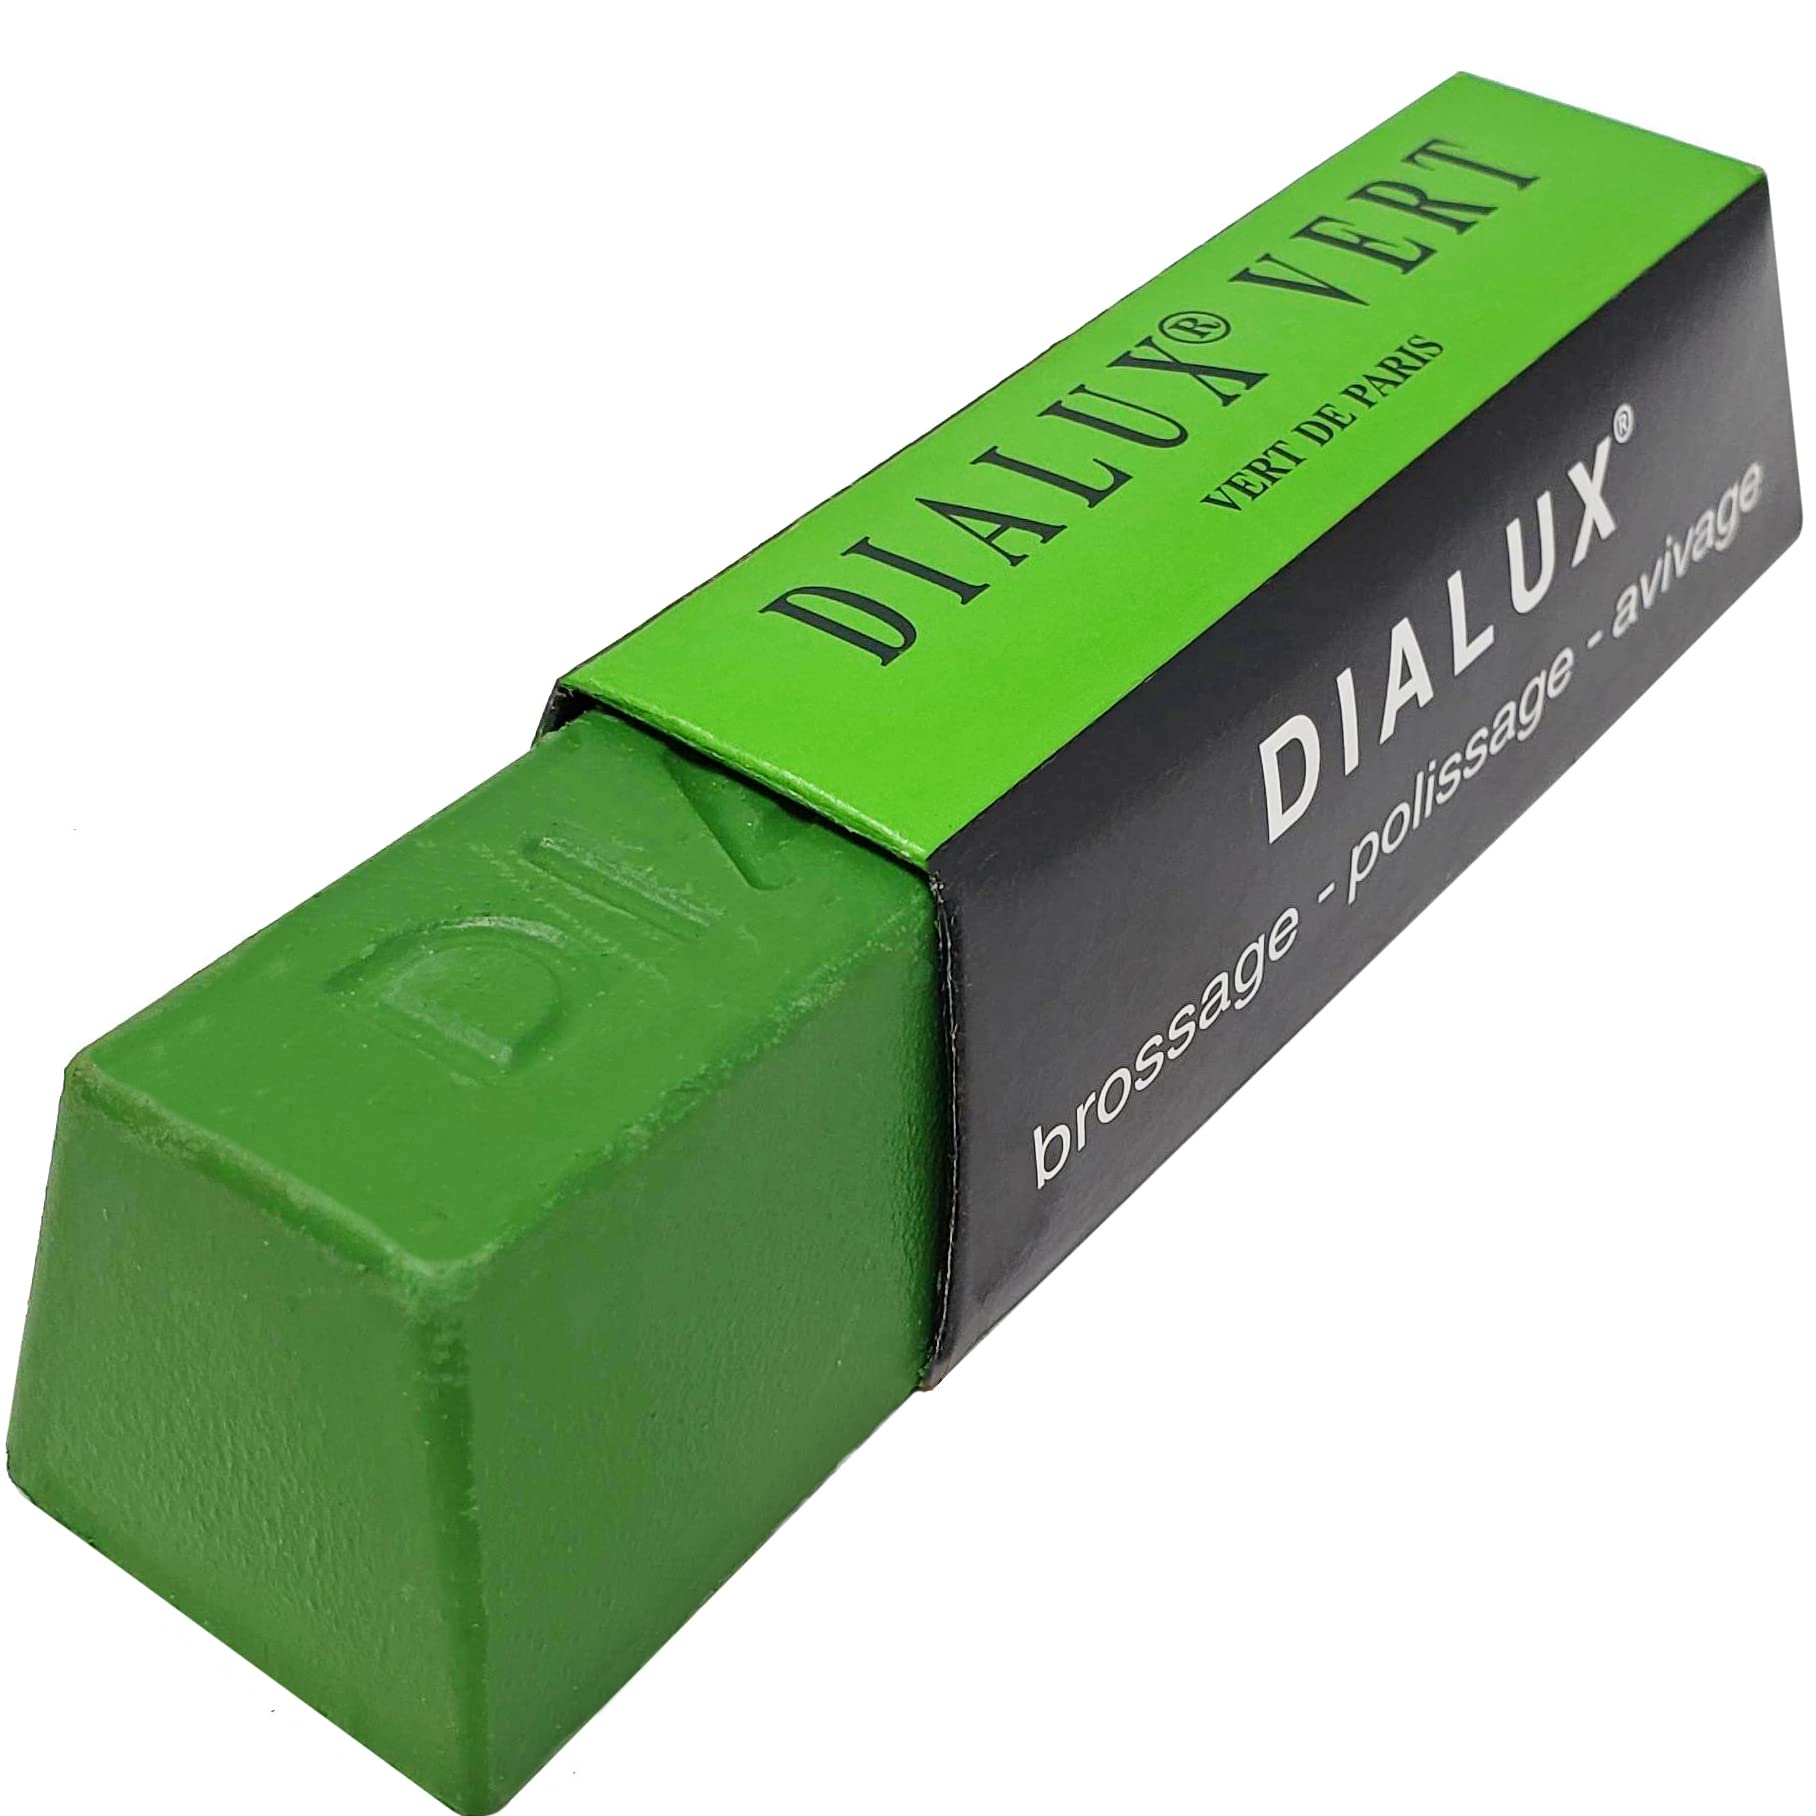 JEWELERS ROUGE POLISH GOLD SILVER JEWELRY DIALUX ROUGE GREEN WHITE & RED -3  BARS